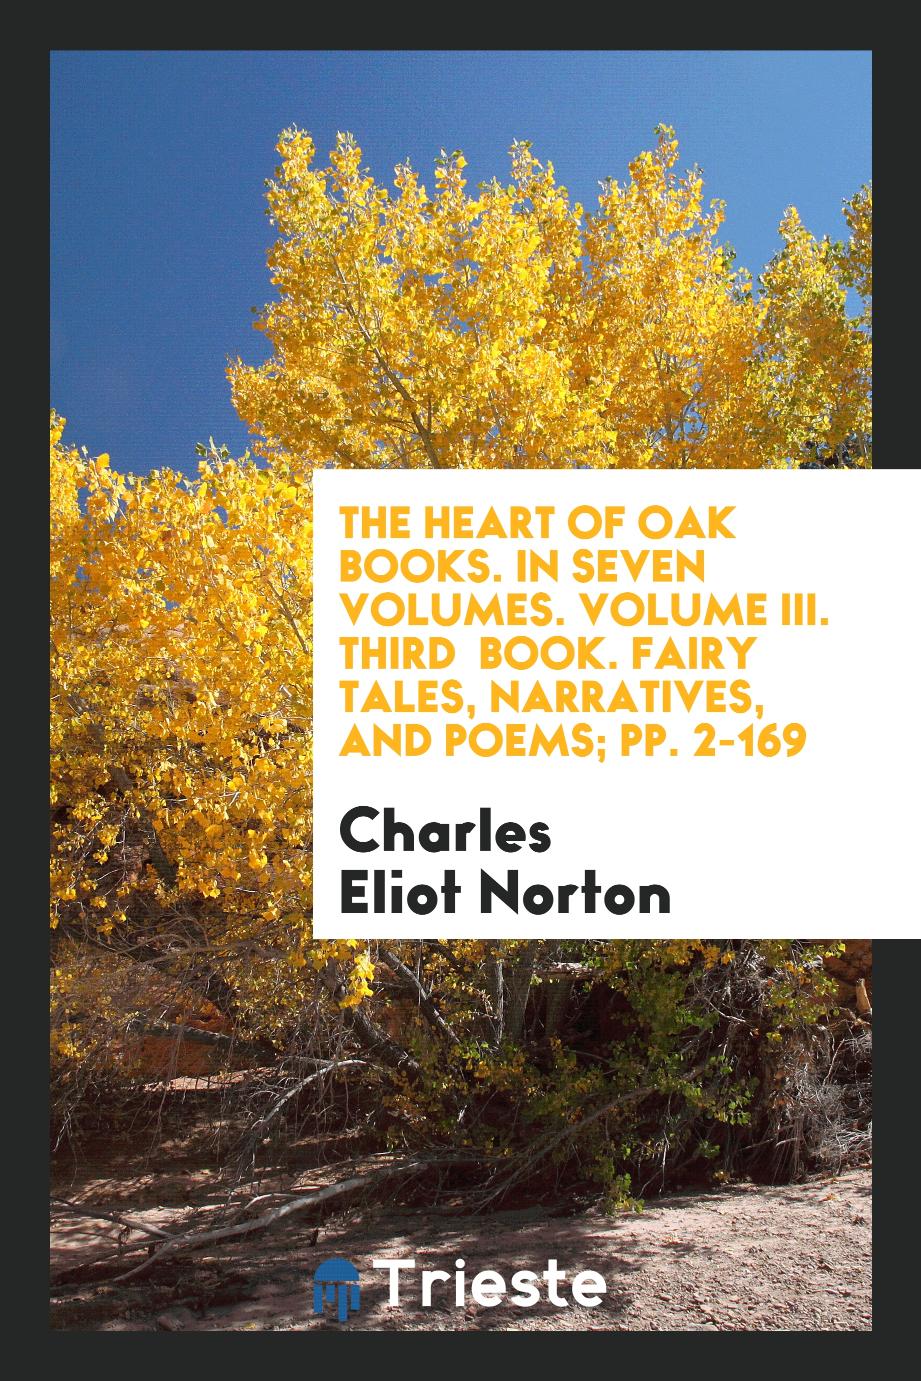 The Heart of Oak Books. In Seven Volumes. Volume III. Third Book. Fairy Tales, Narratives, and Poems; pp. 2-169